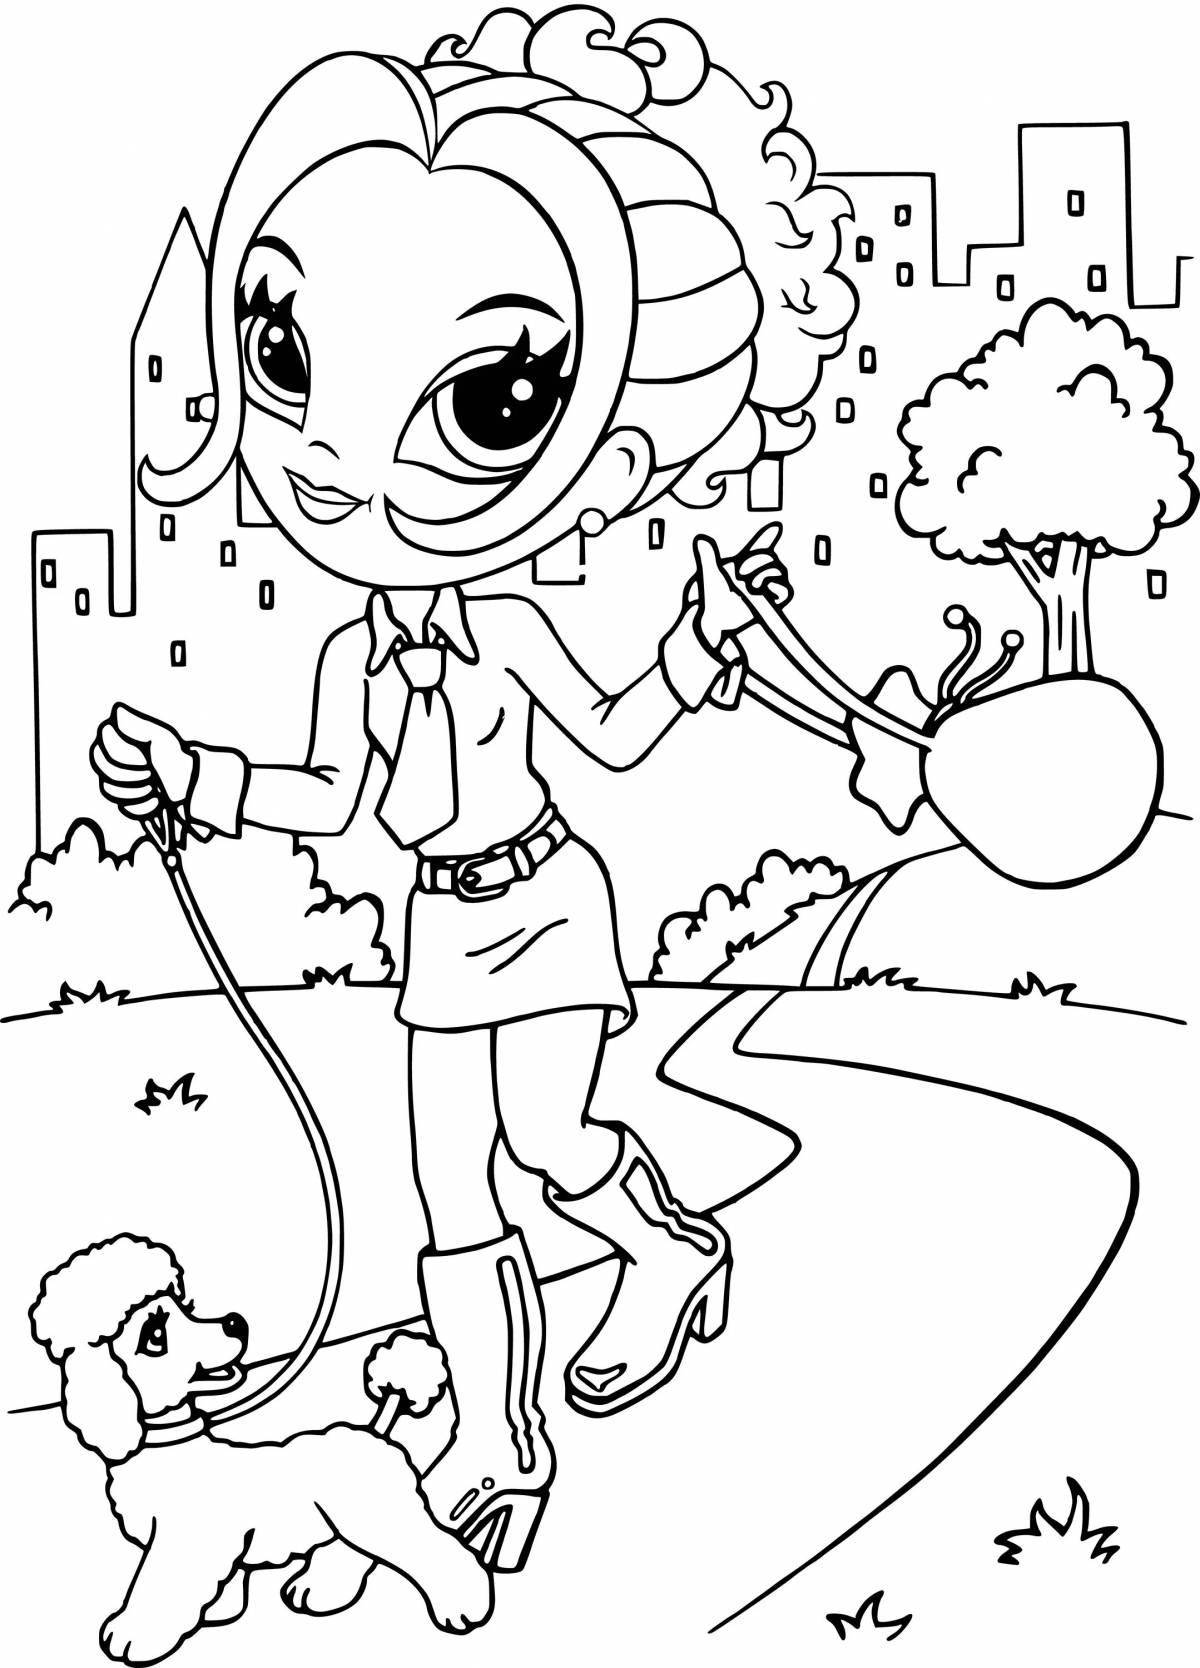 Magic coloring game for 10 year old girls